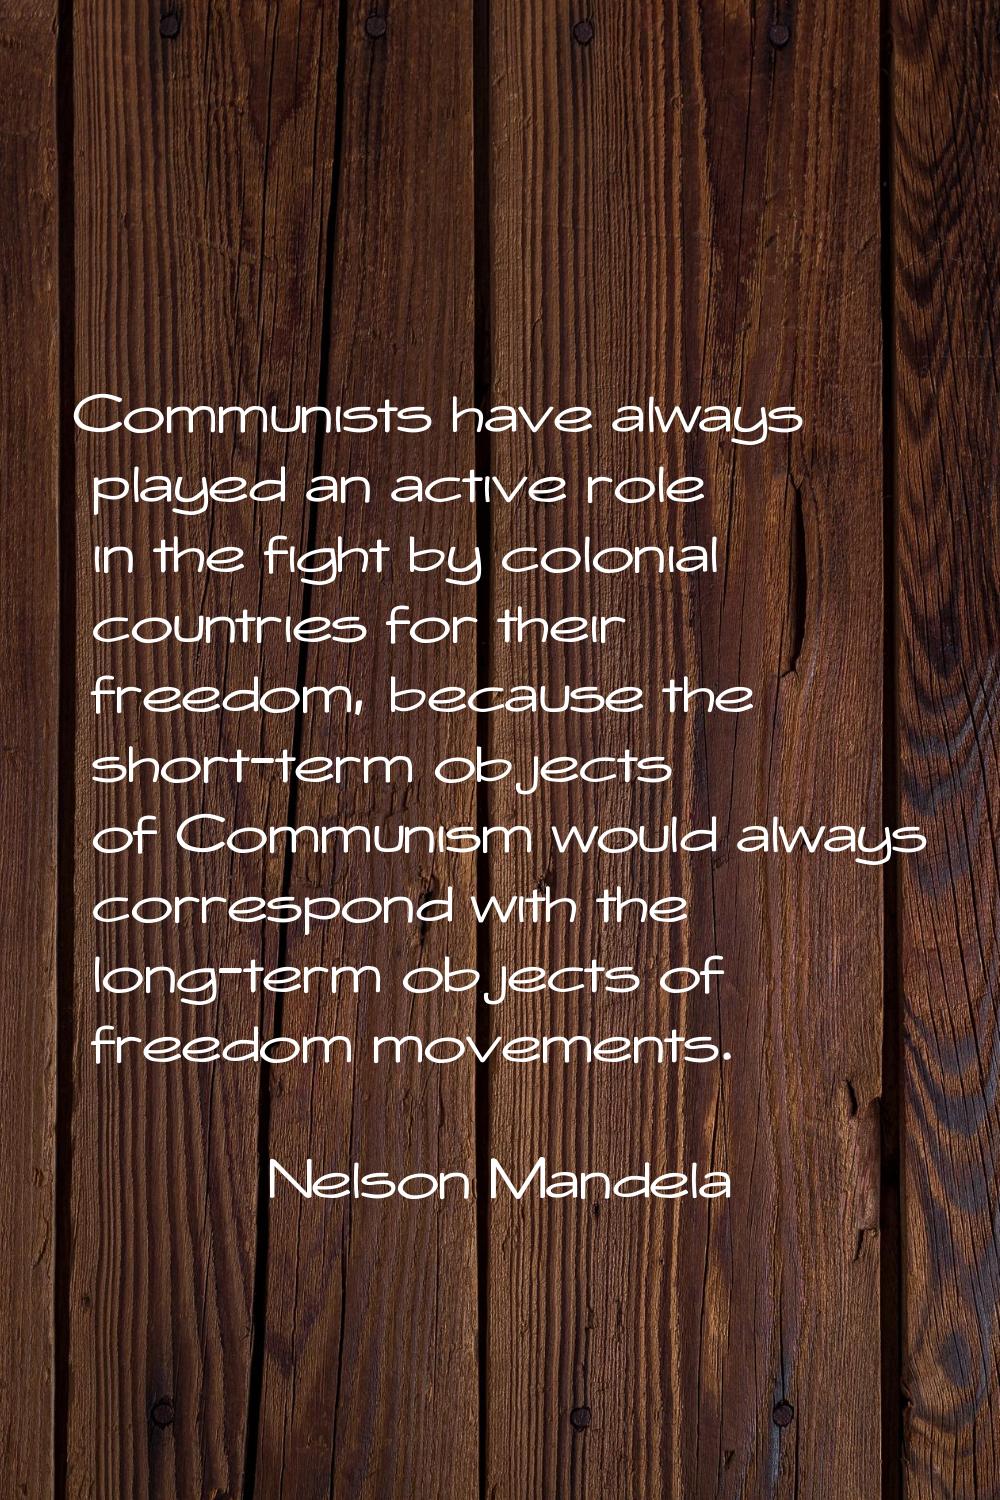 Communists have always played an active role in the fight by colonial countries for their freedom, 